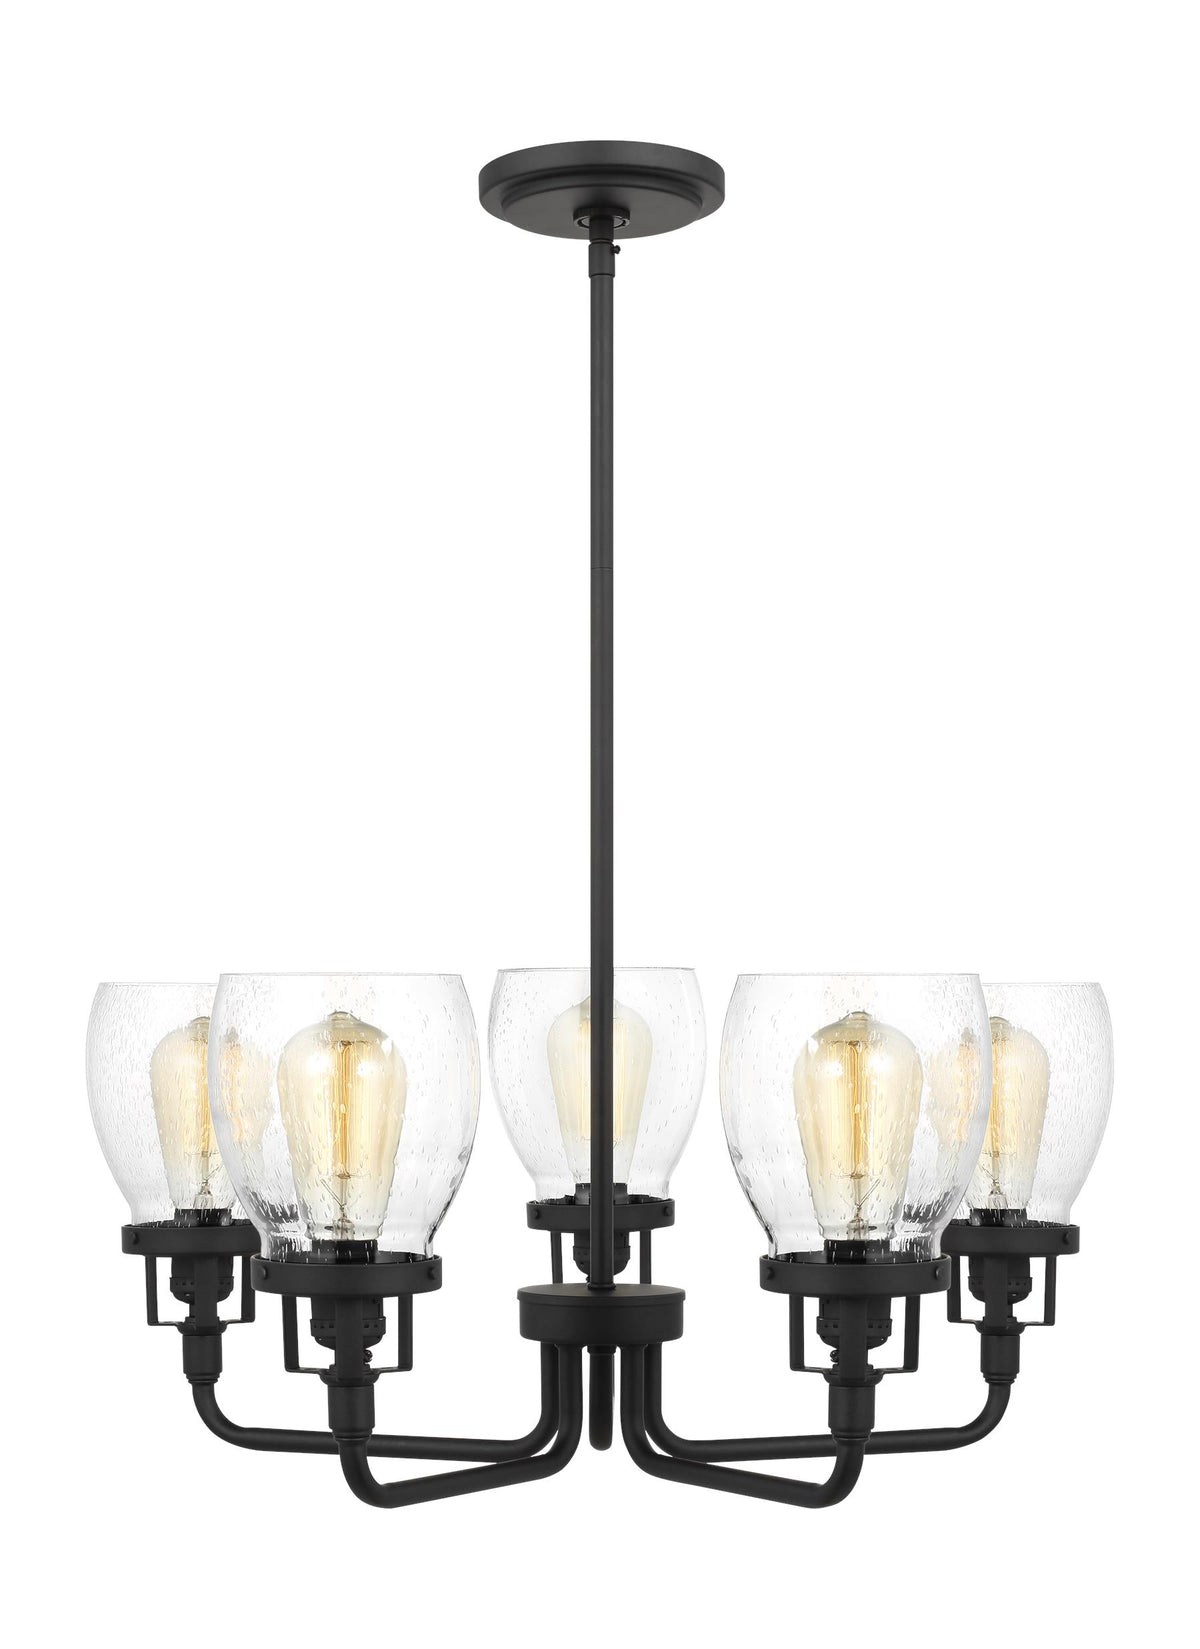 Belton Five Light Up Chandelier Sea Gull Collection